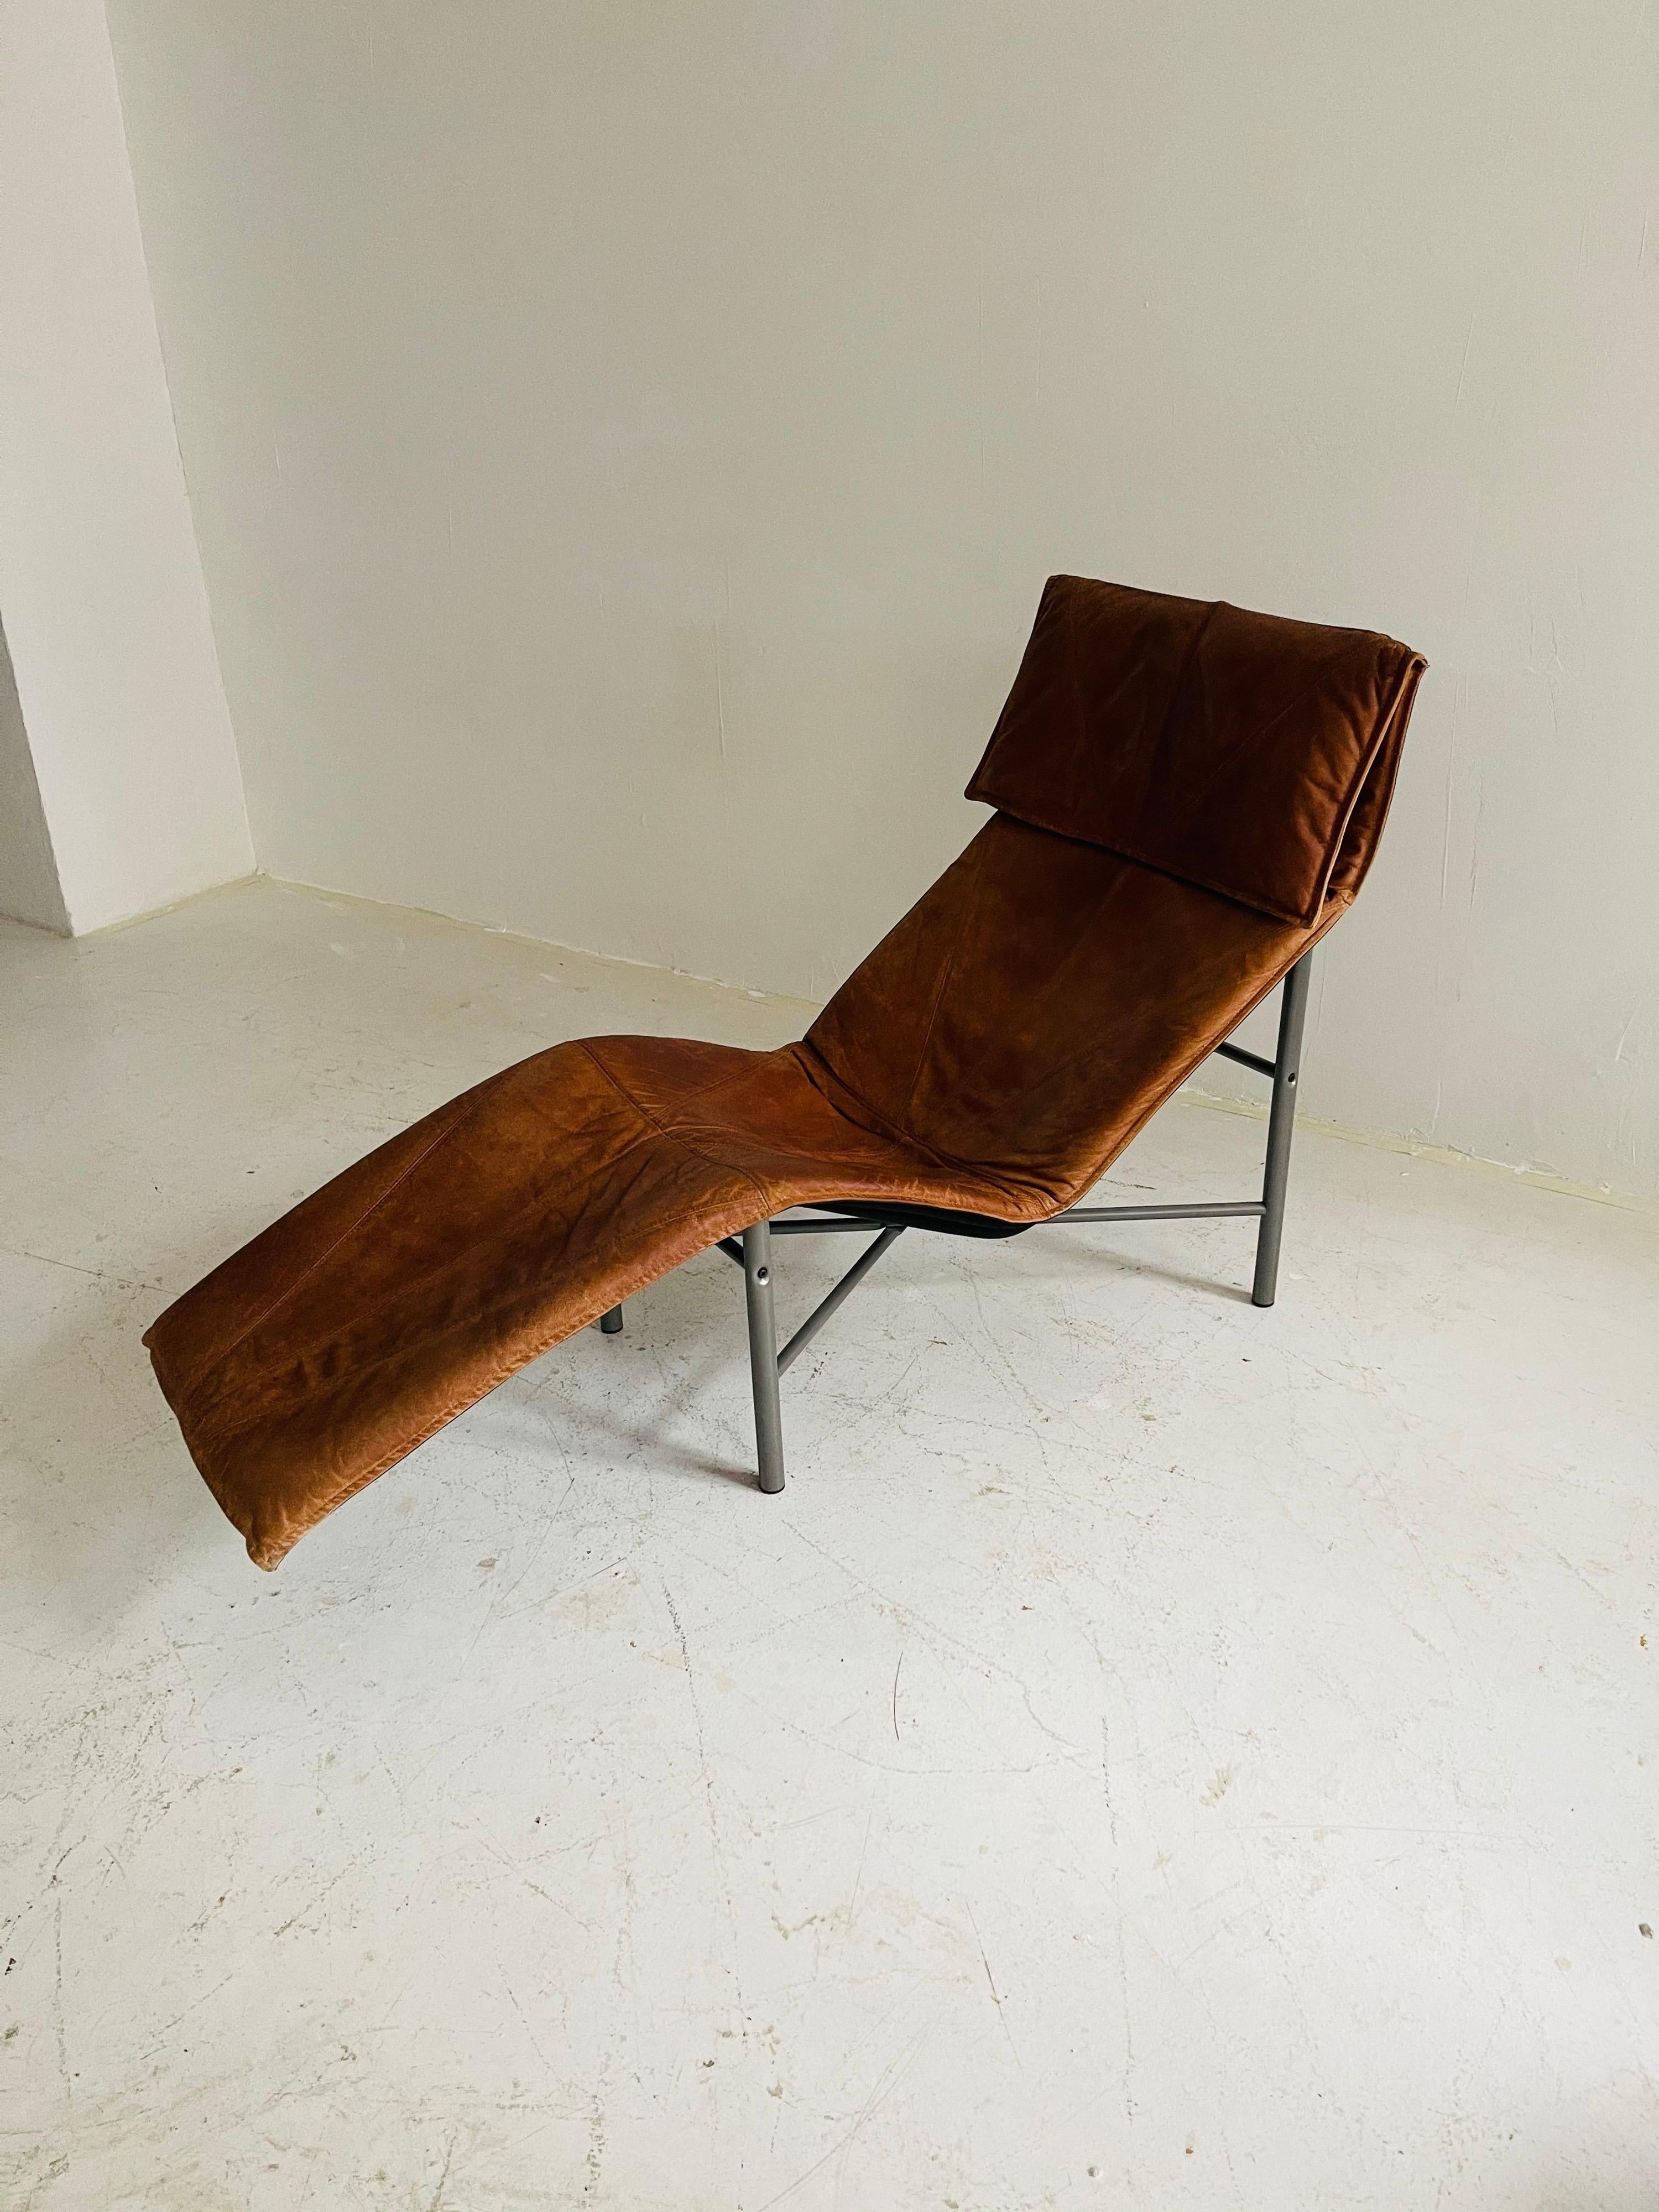 Patinated cognac leather chaise longue by Tord Bjorklund Sweden, 1970.